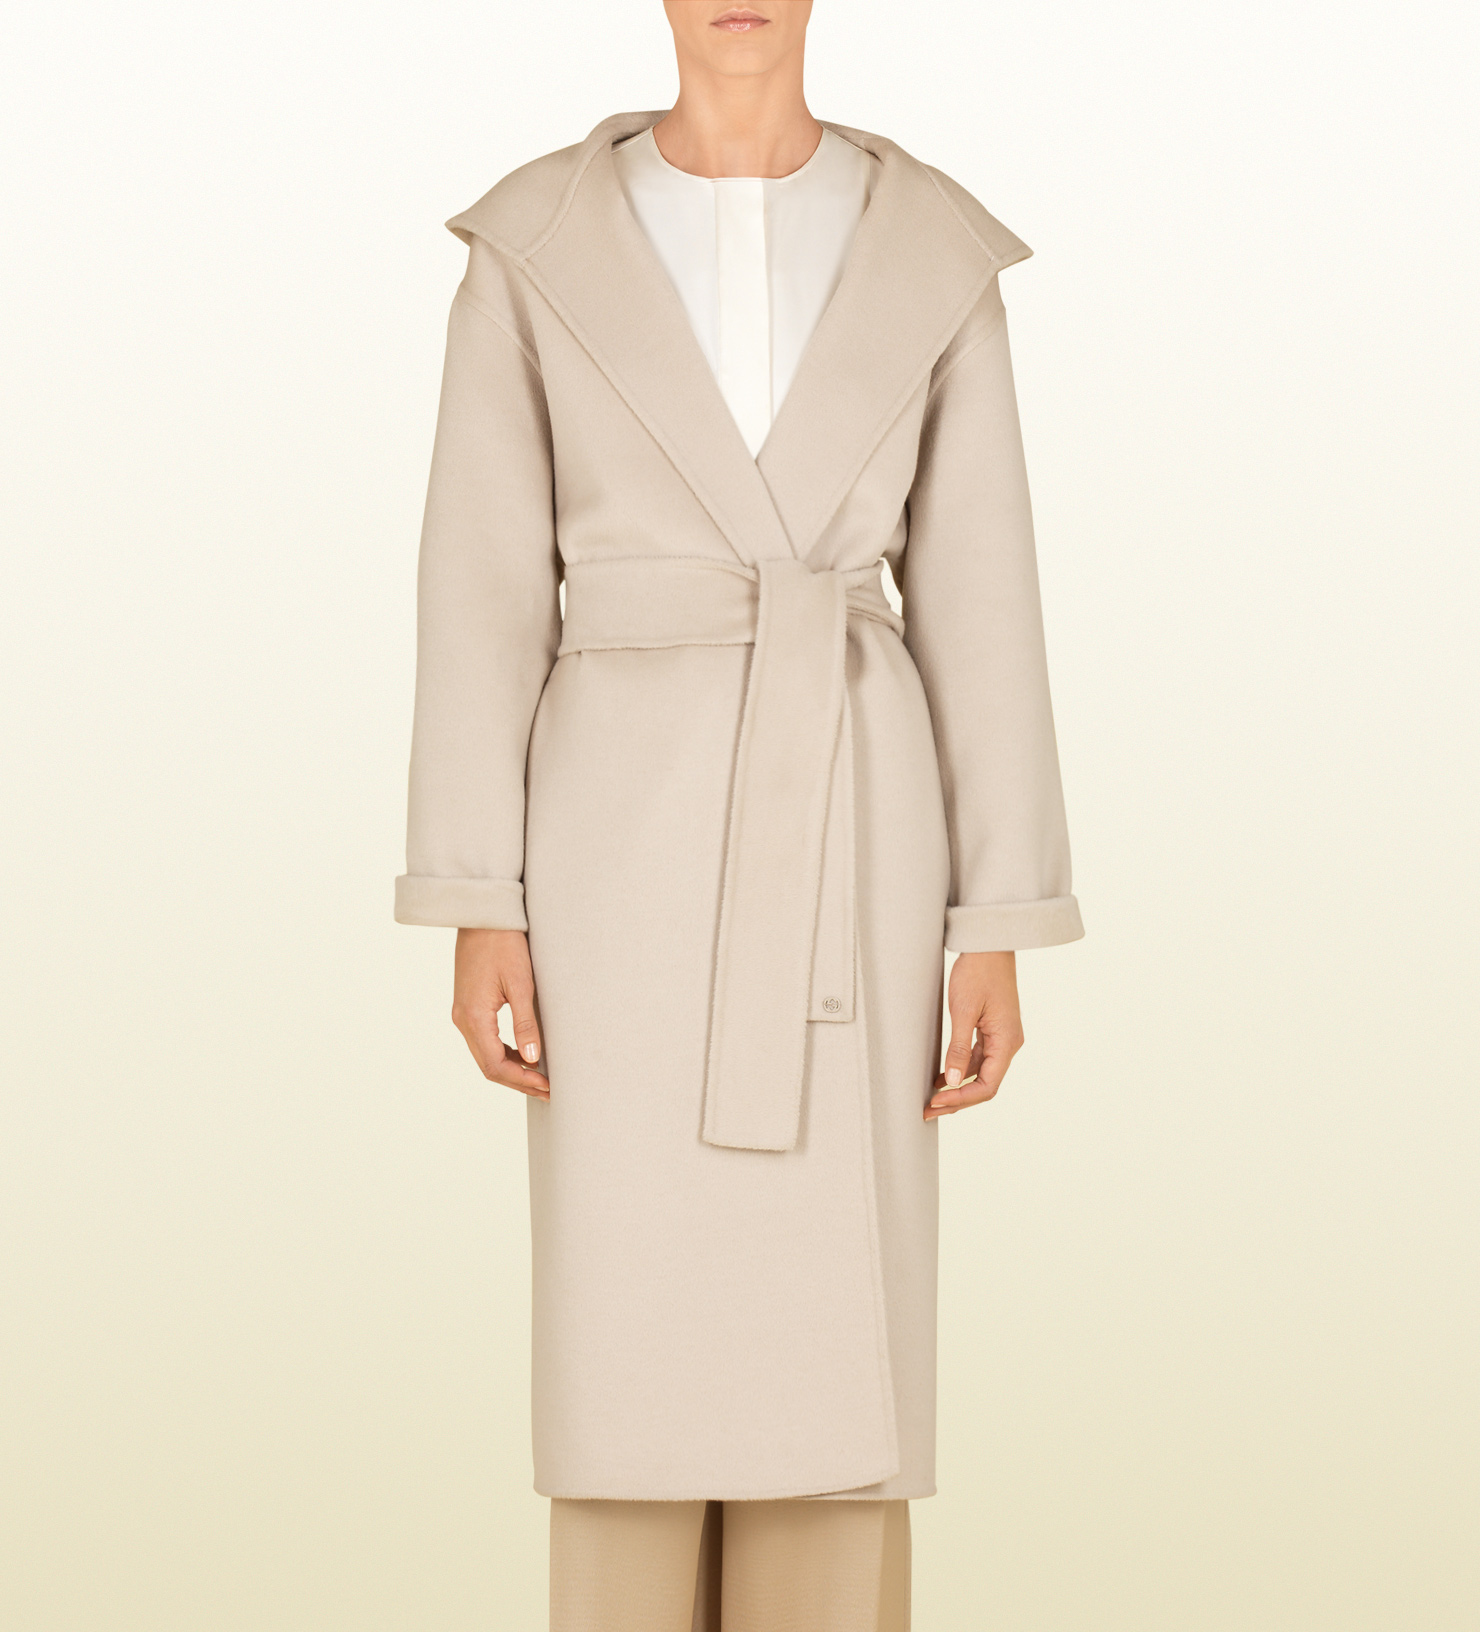 Gucci Ivory Soft Wool Hooded Deconstructed Coat in Natural | Lyst